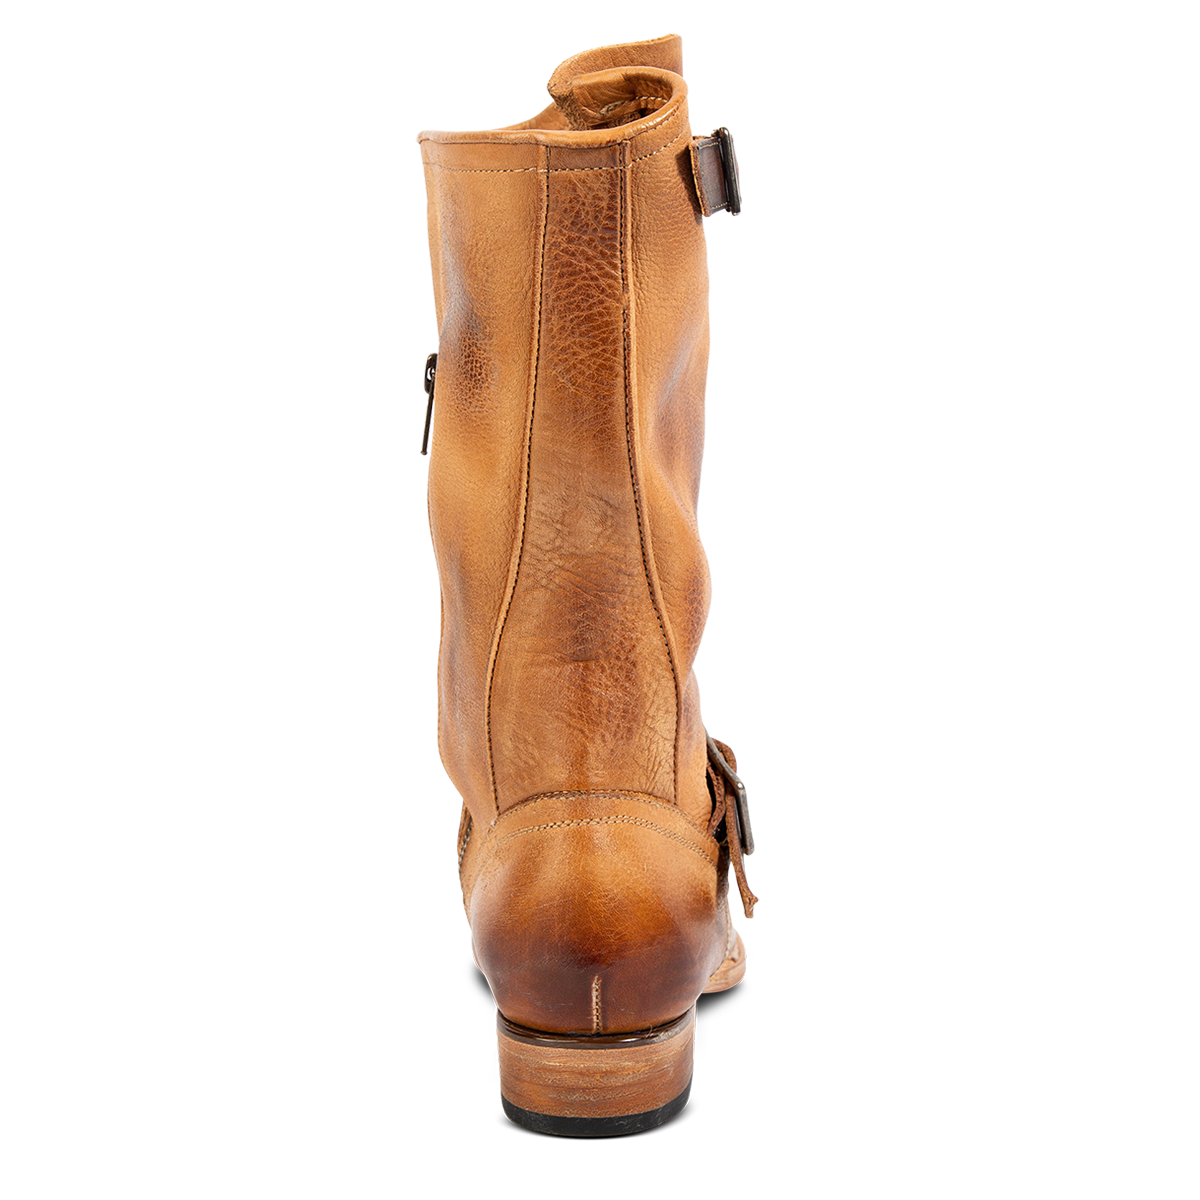 Back view showing an asymmetrical shaft height and low block heel on FREEBIRD women's Rip wheat leather boot 